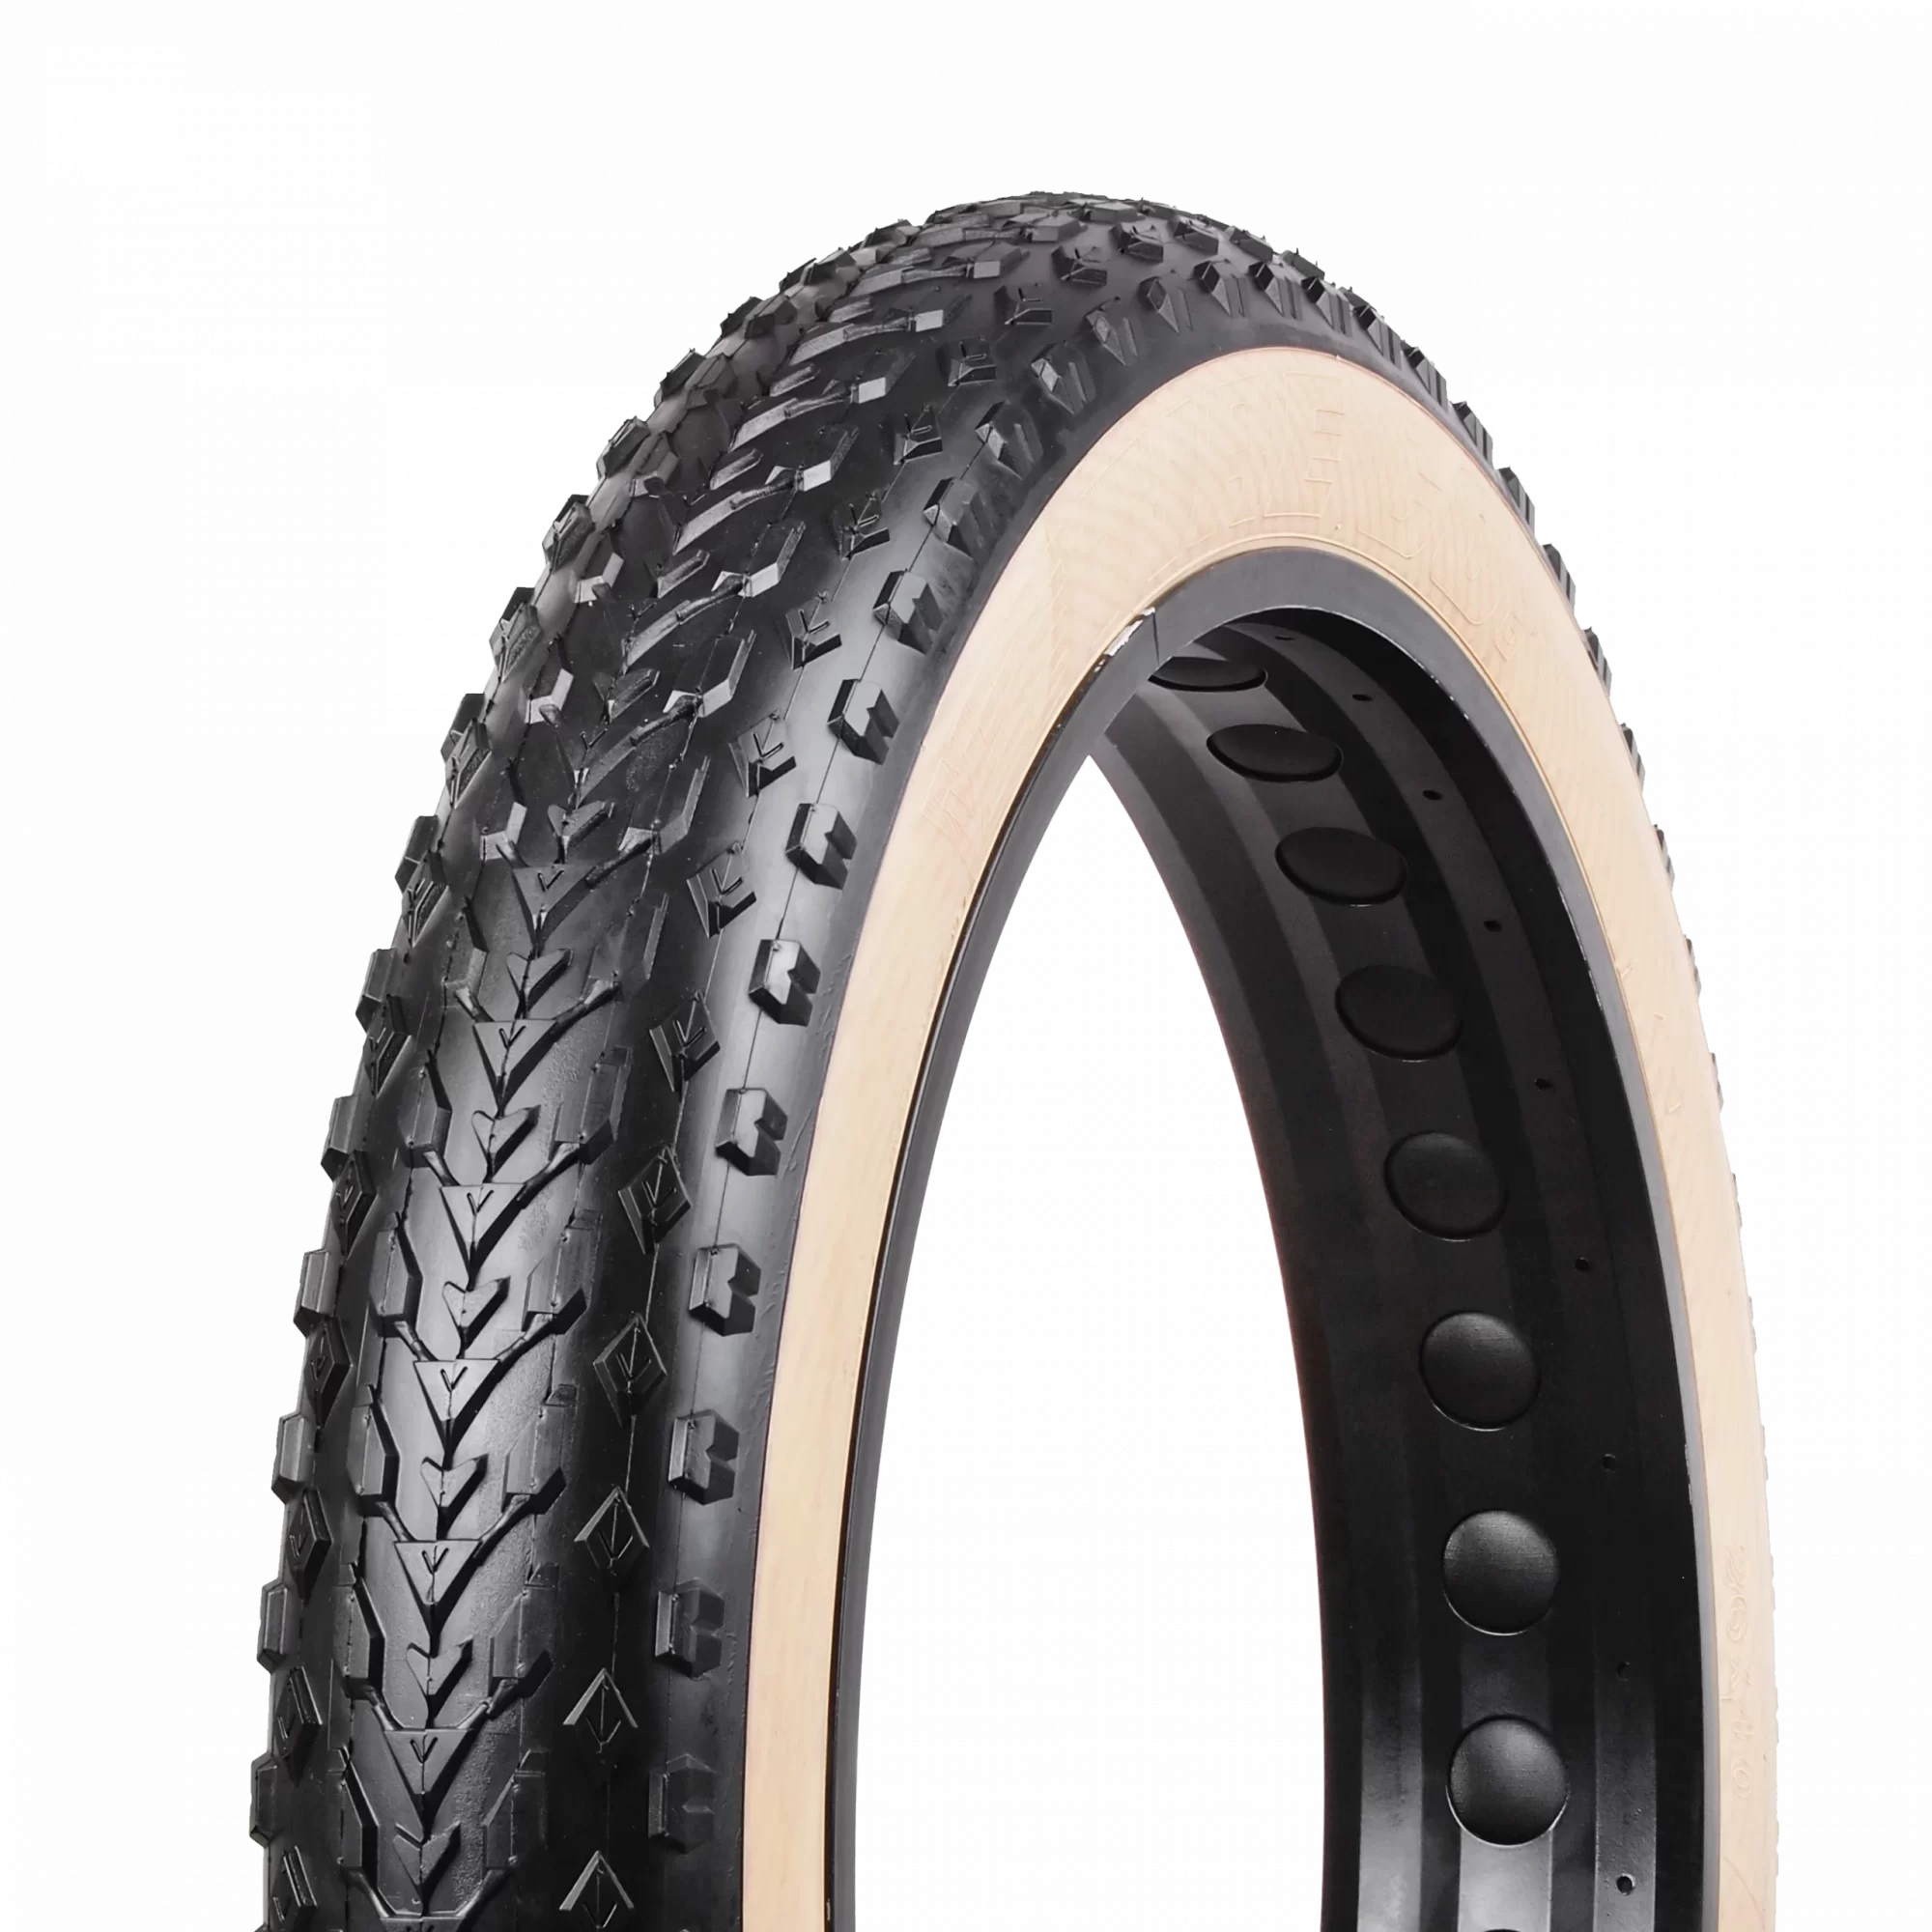 Vee Tire Mission Command Flanco natural